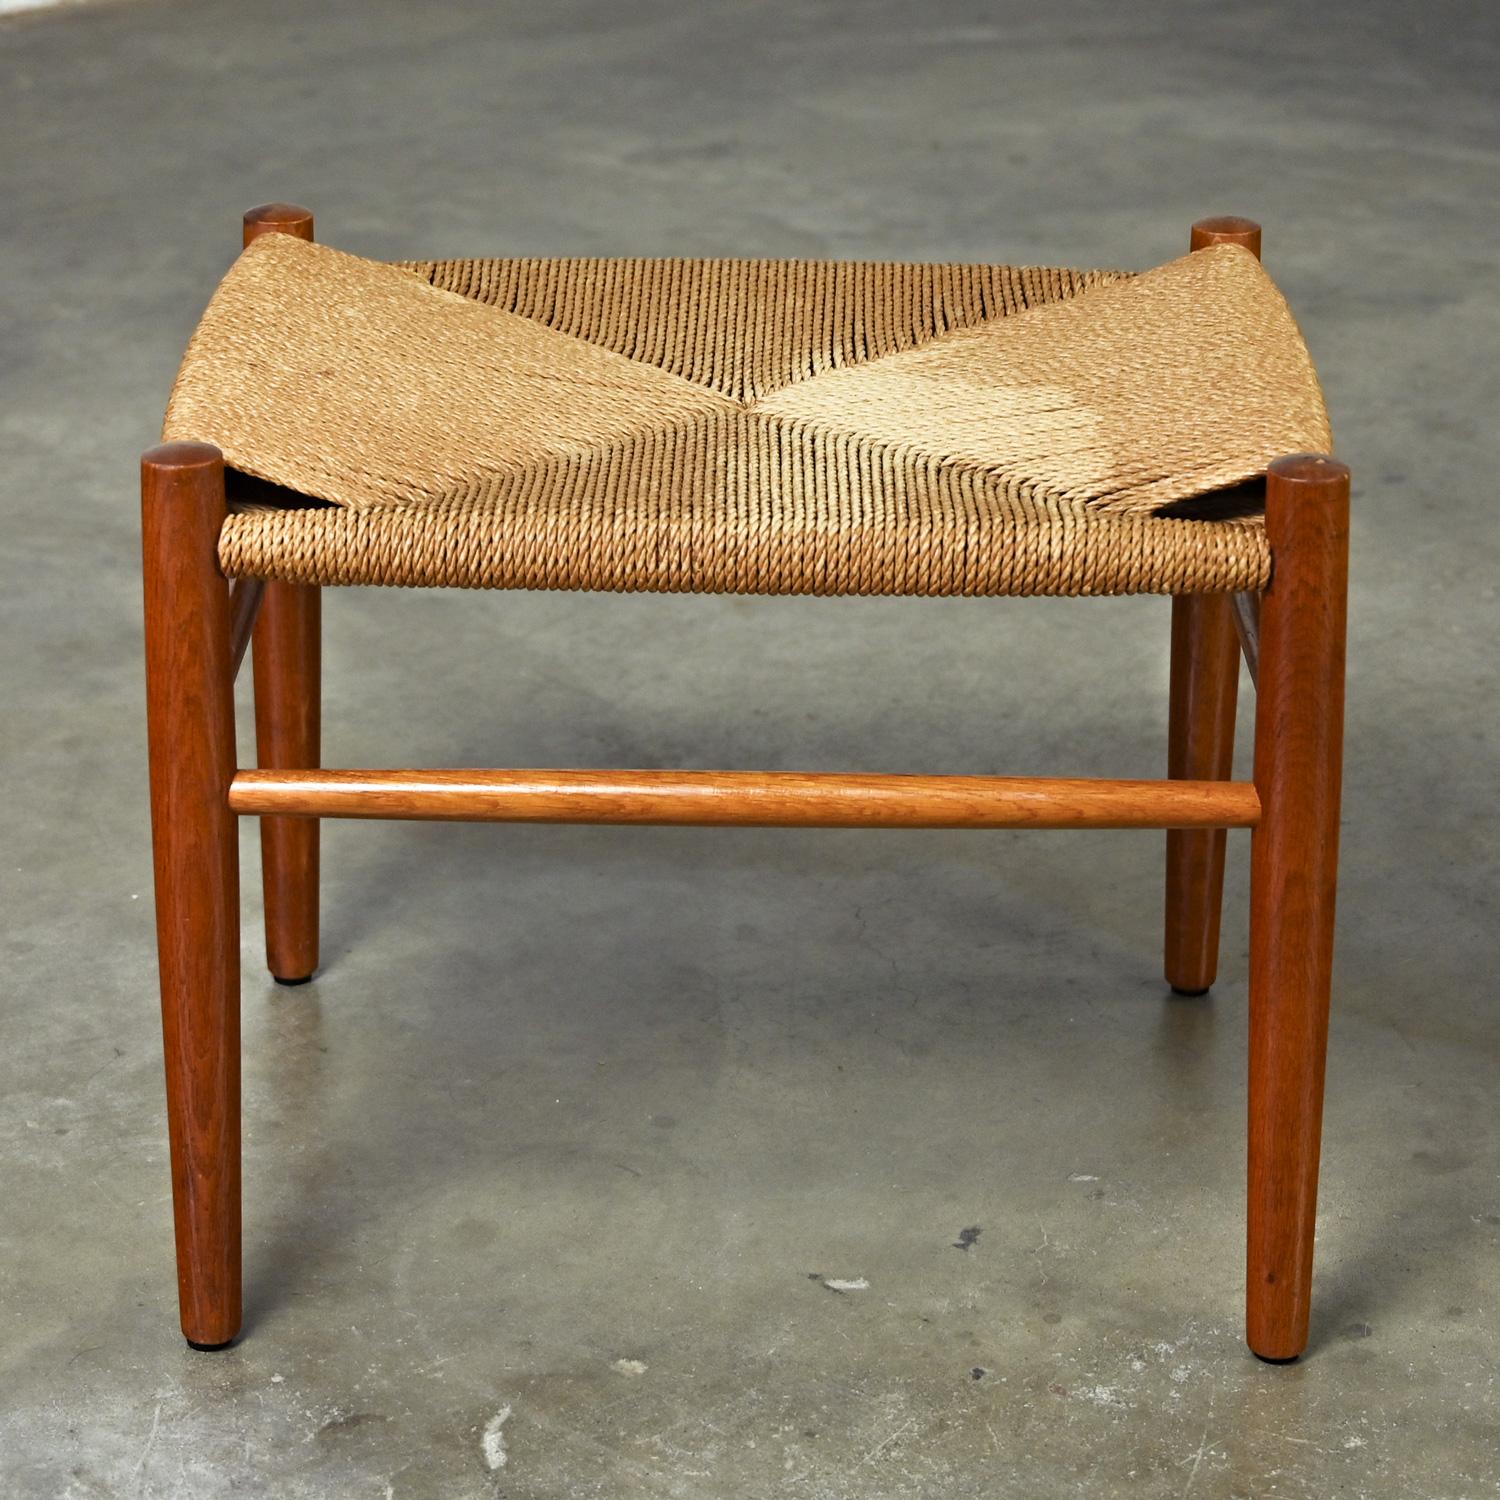 Mid-20th Century Scandinavian Modern Low Stool Teak with Natural Paper Cord Seat 14